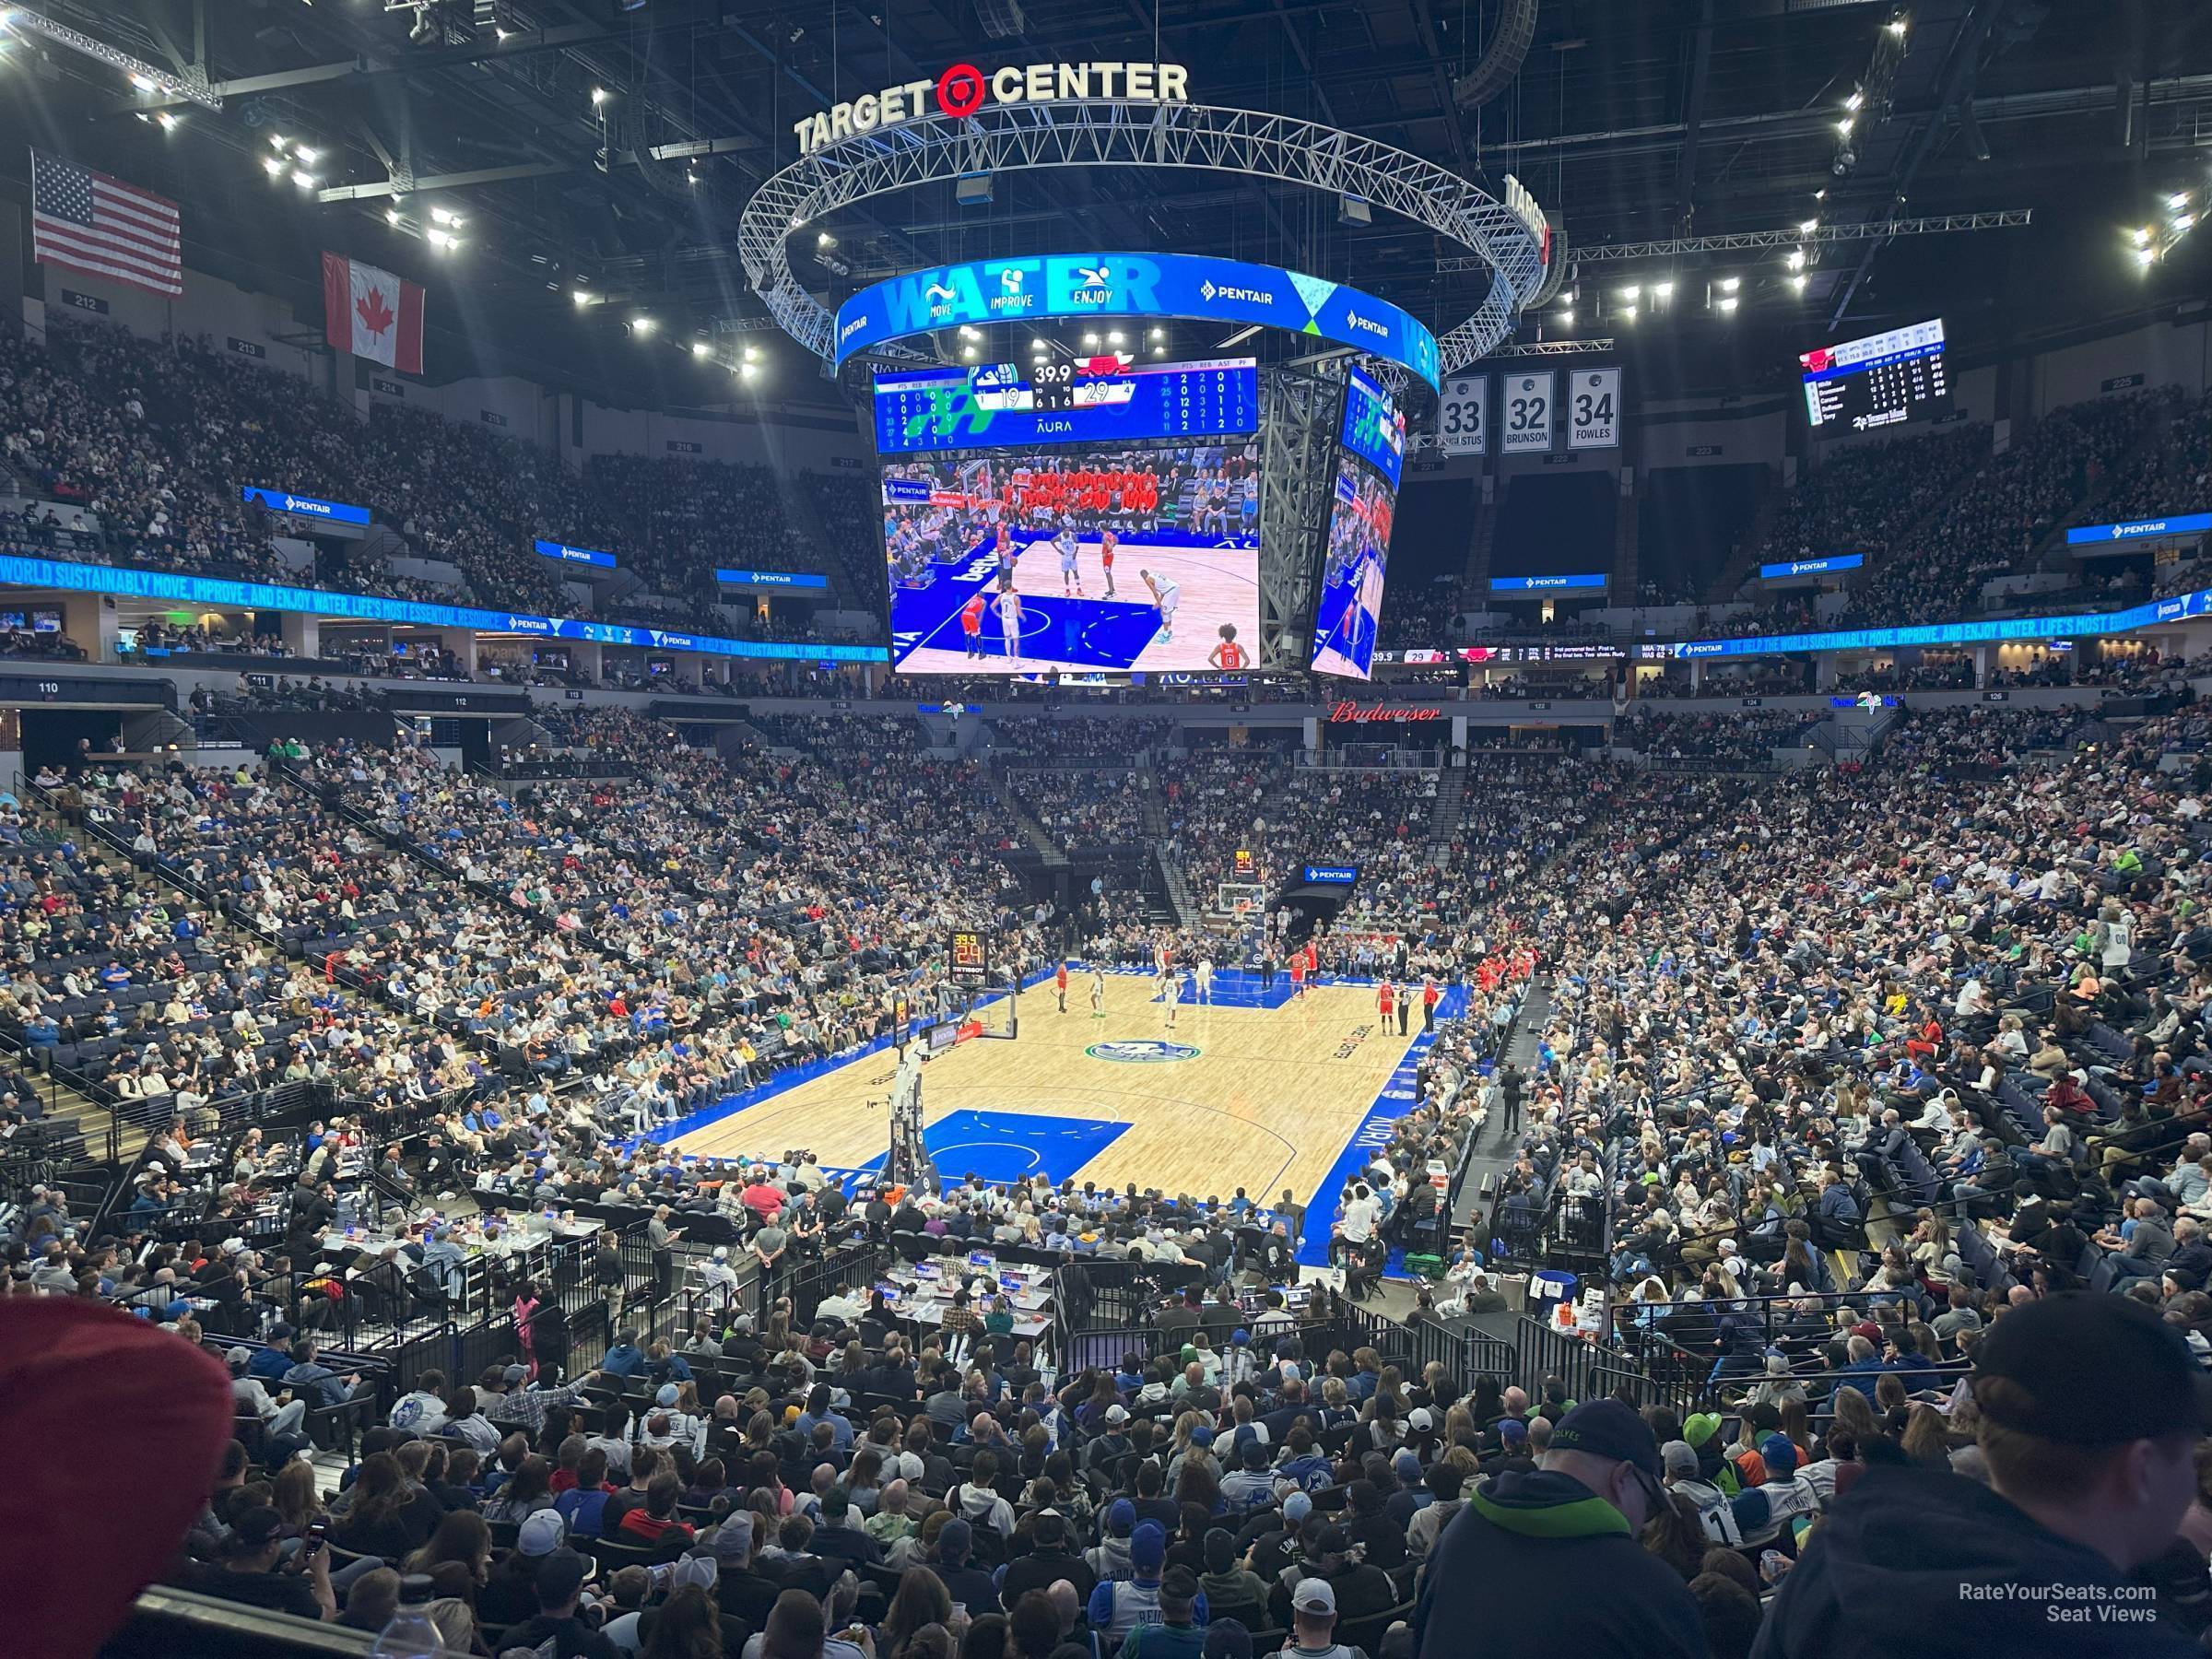 section 138, row u seat view  for basketball - target center